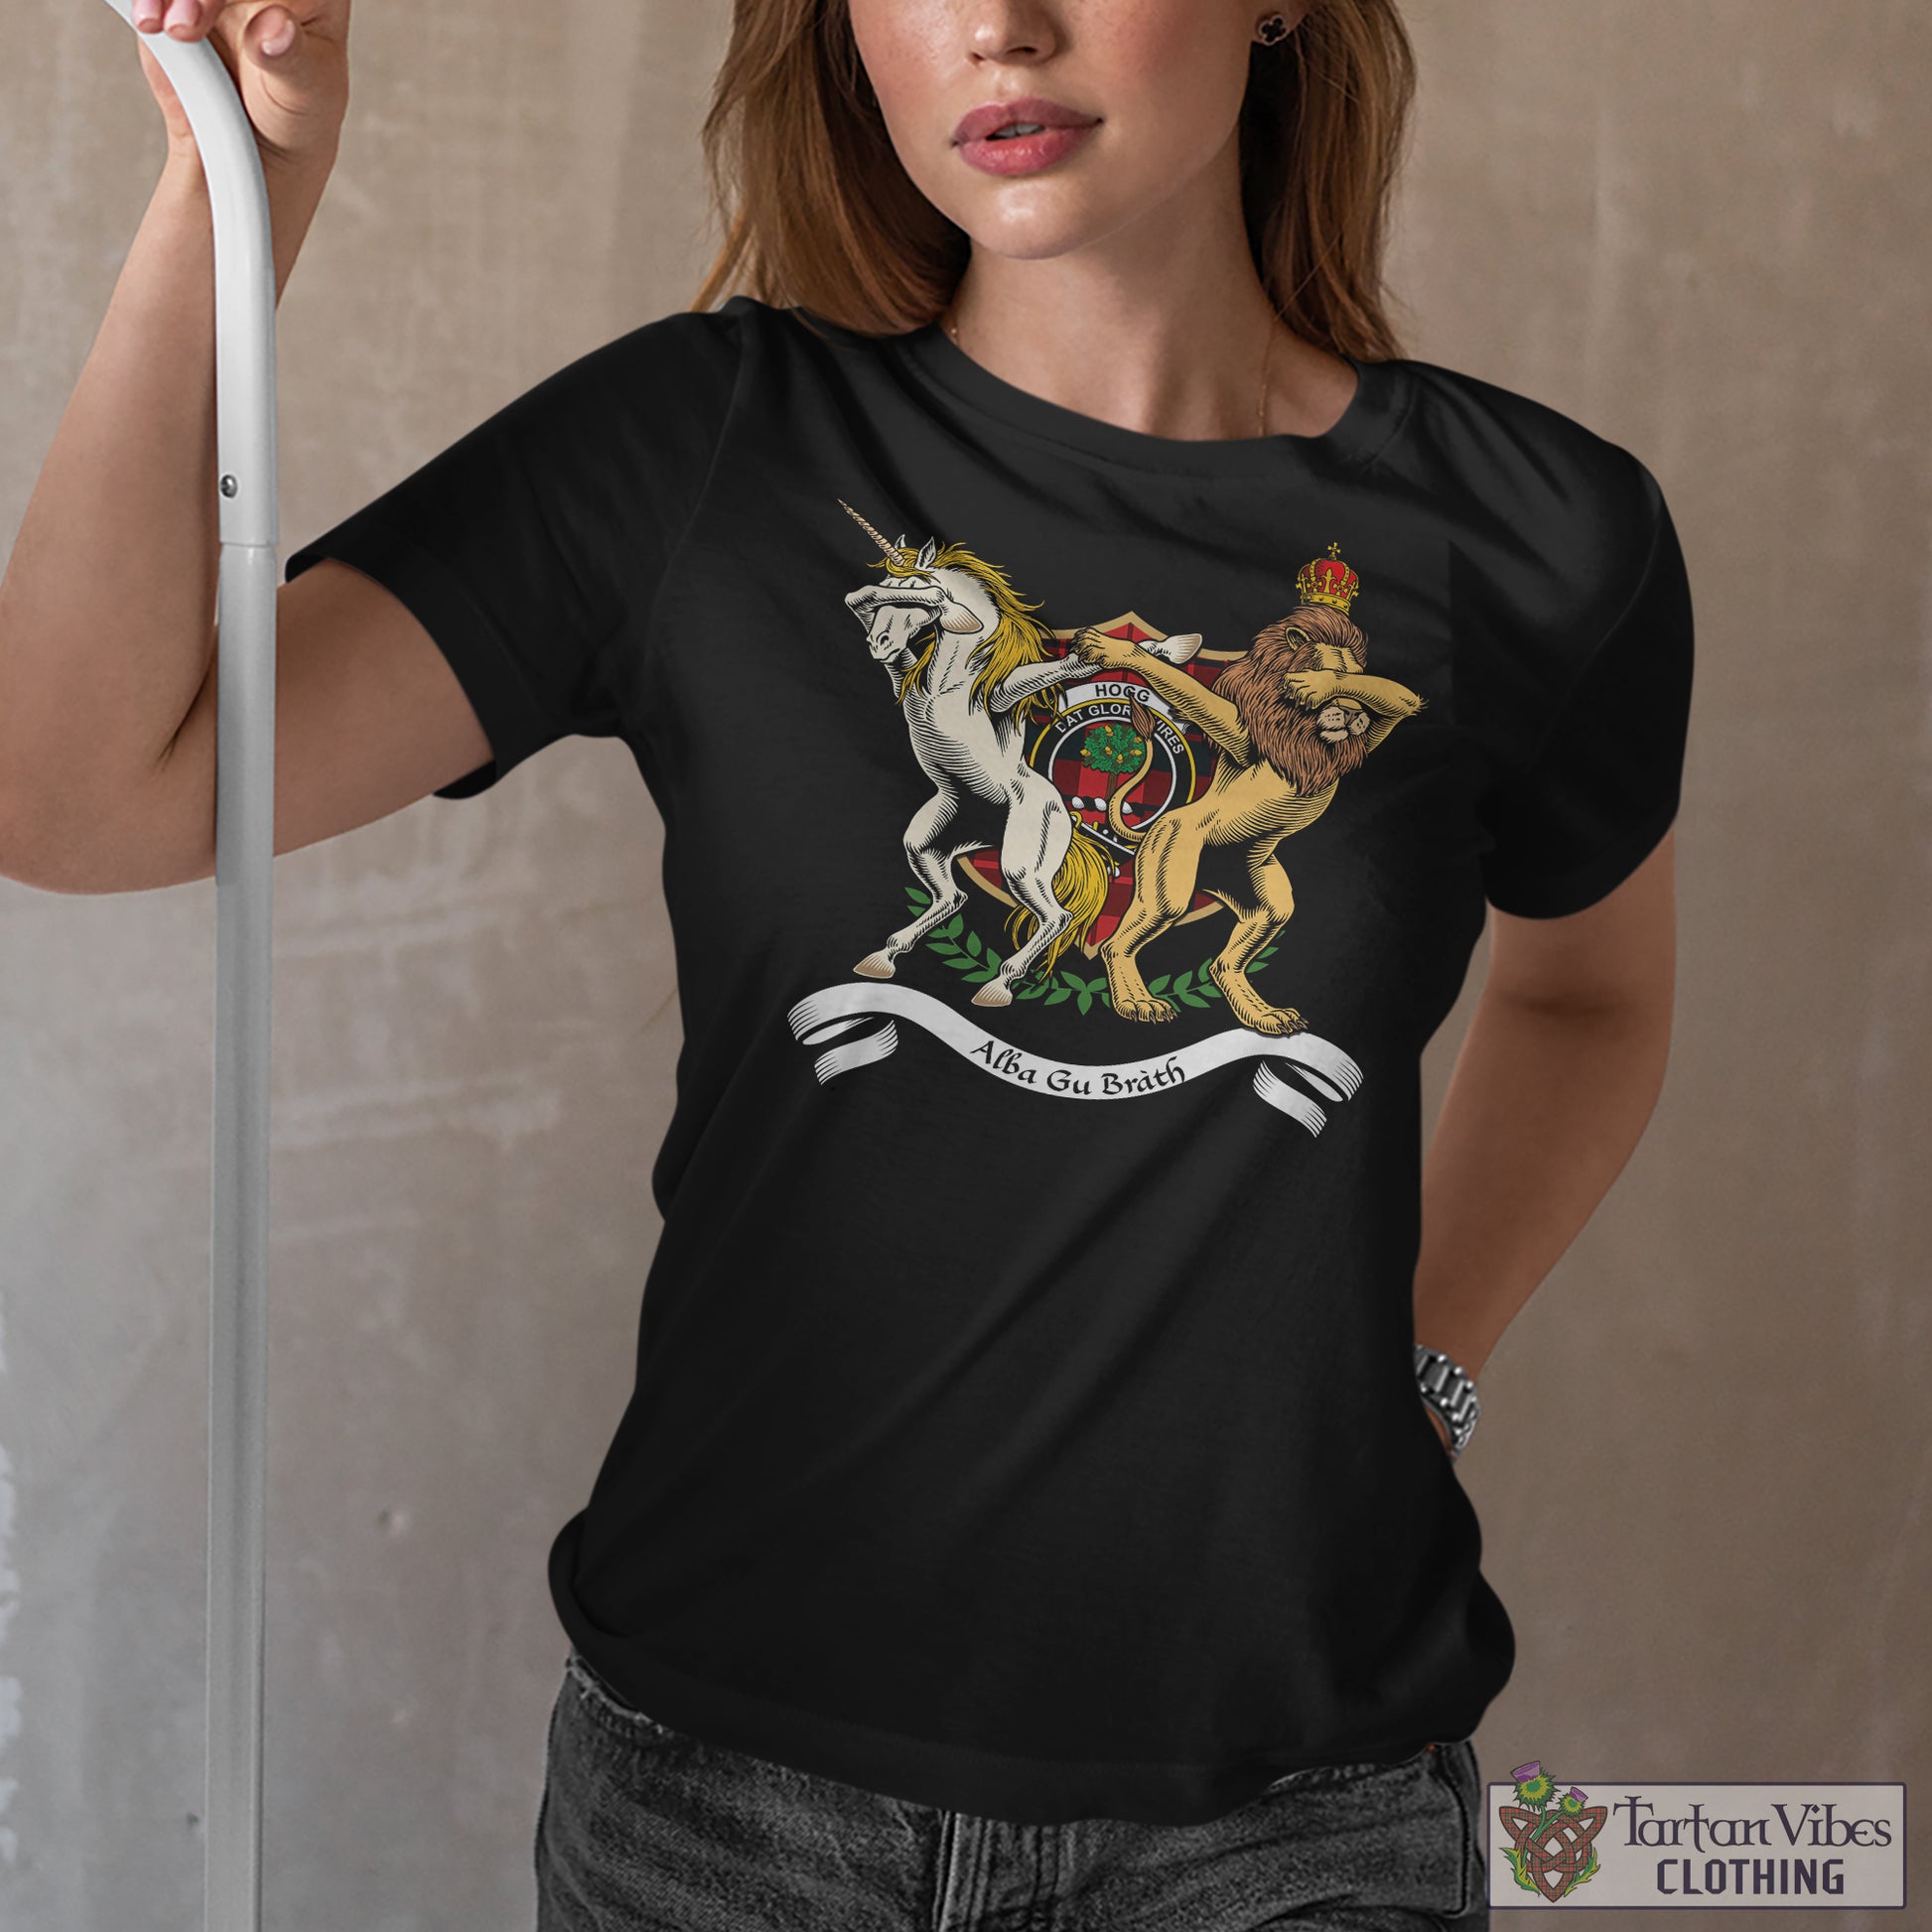 Tartan Vibes Clothing Hogg Family Crest Cotton Women's T-Shirt with Scotland Royal Coat Of Arm Funny Style